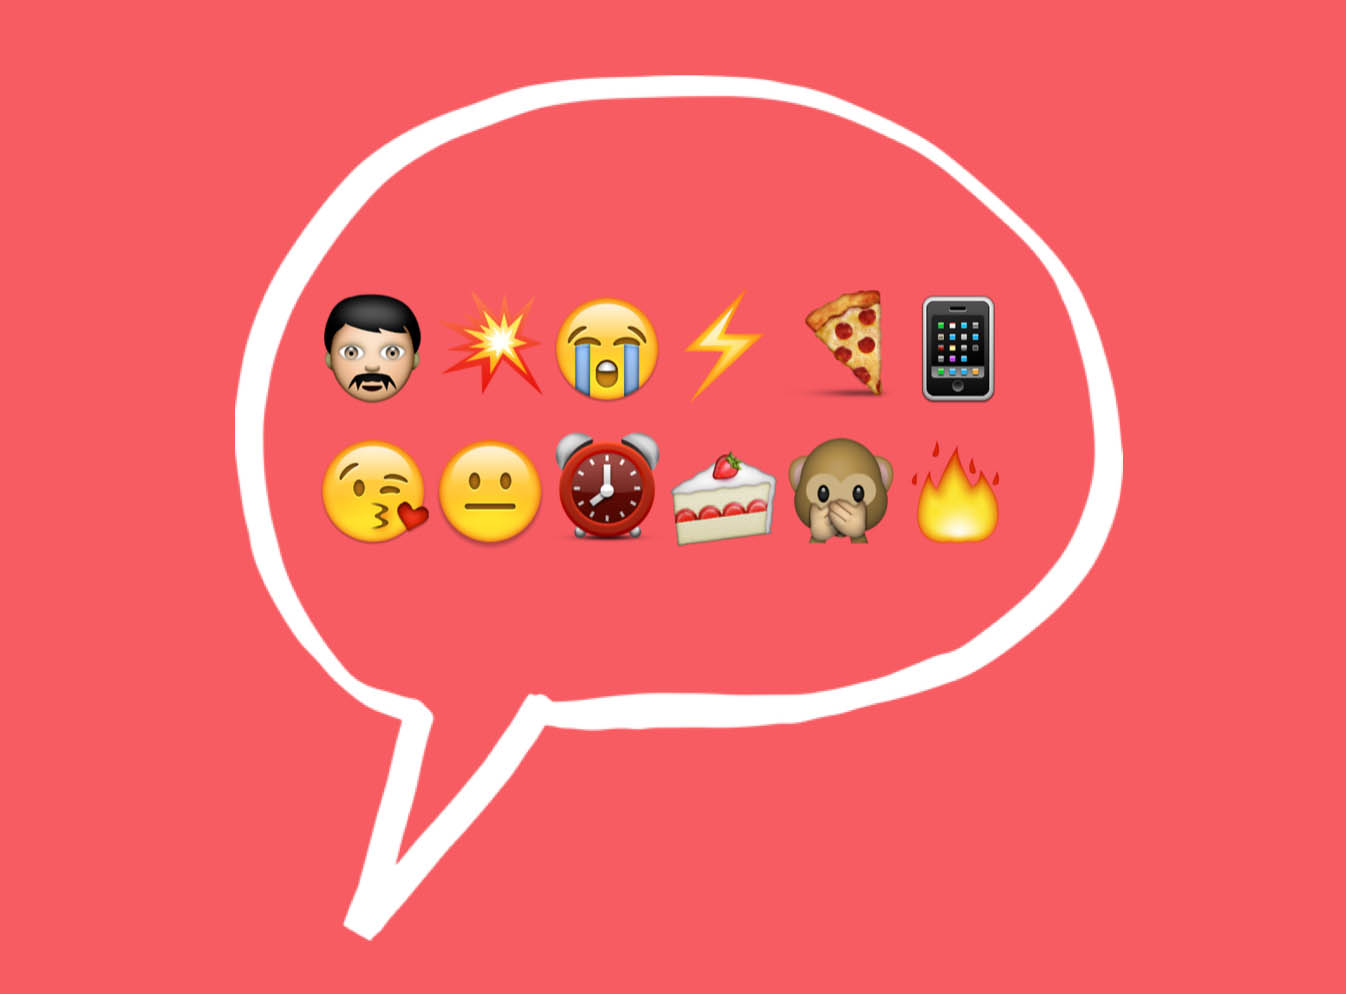 Thought bubble with emoji icons